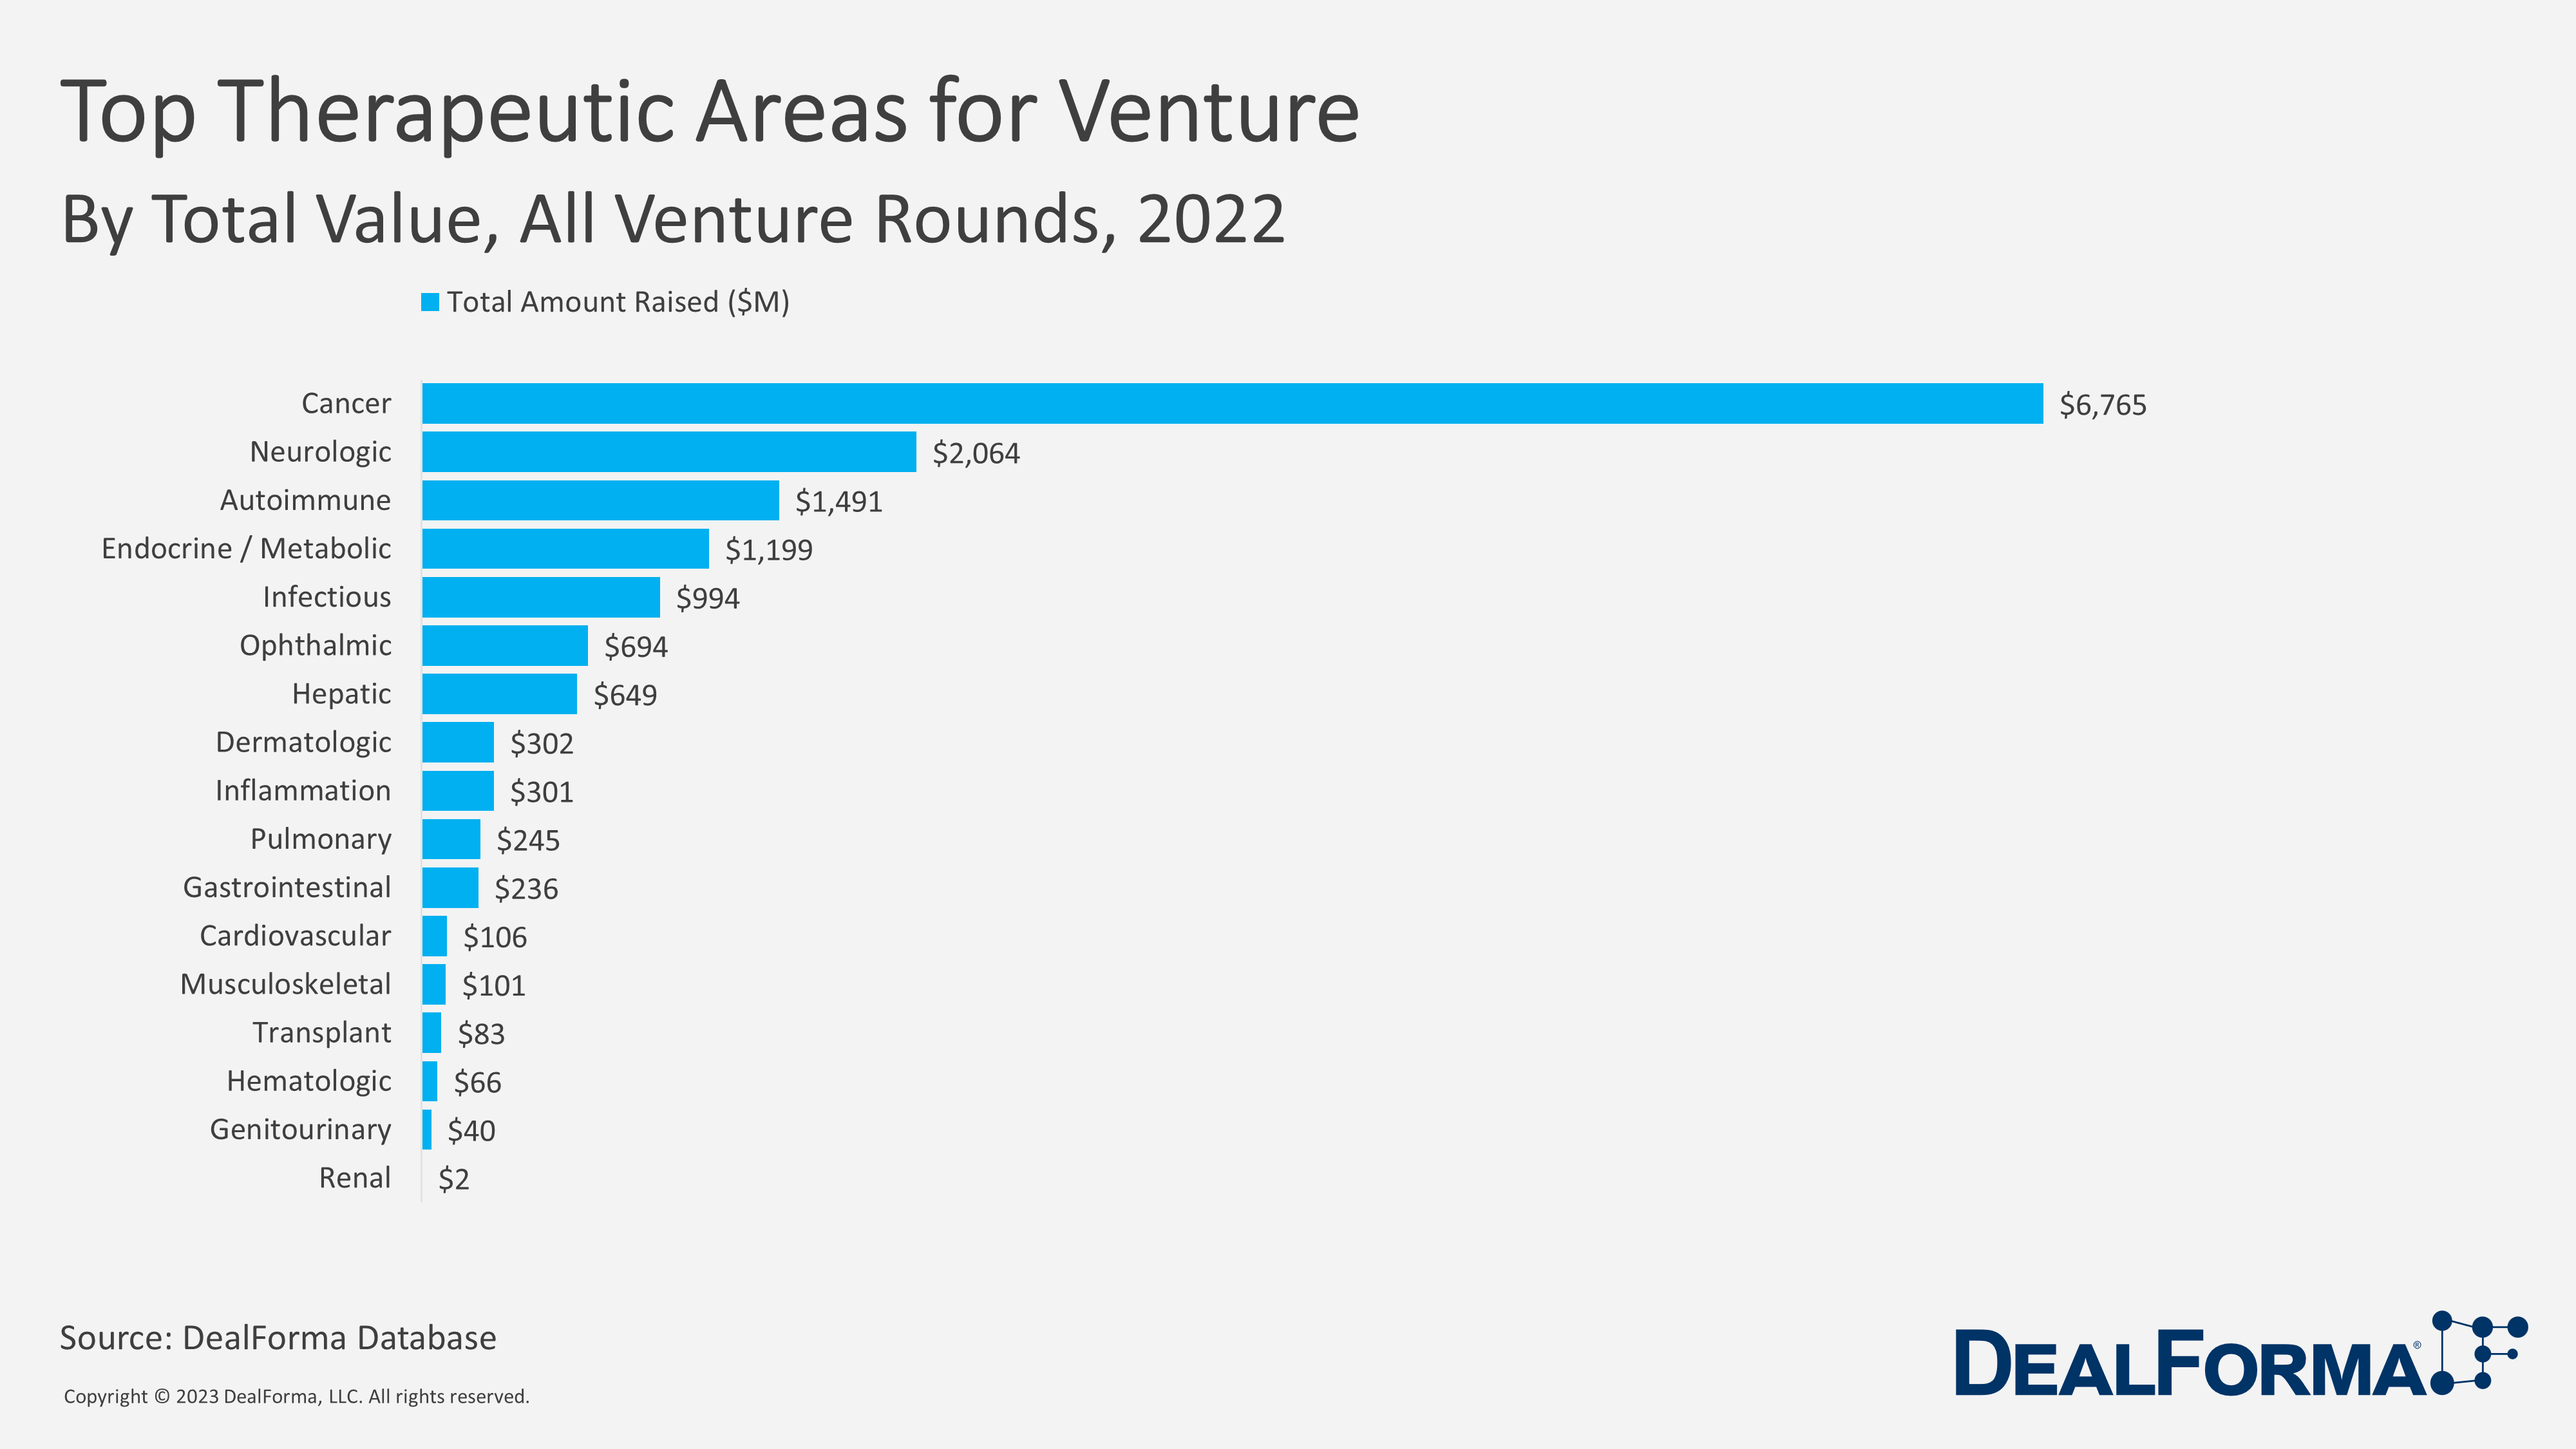 Top Therapeutic Areas for Venture